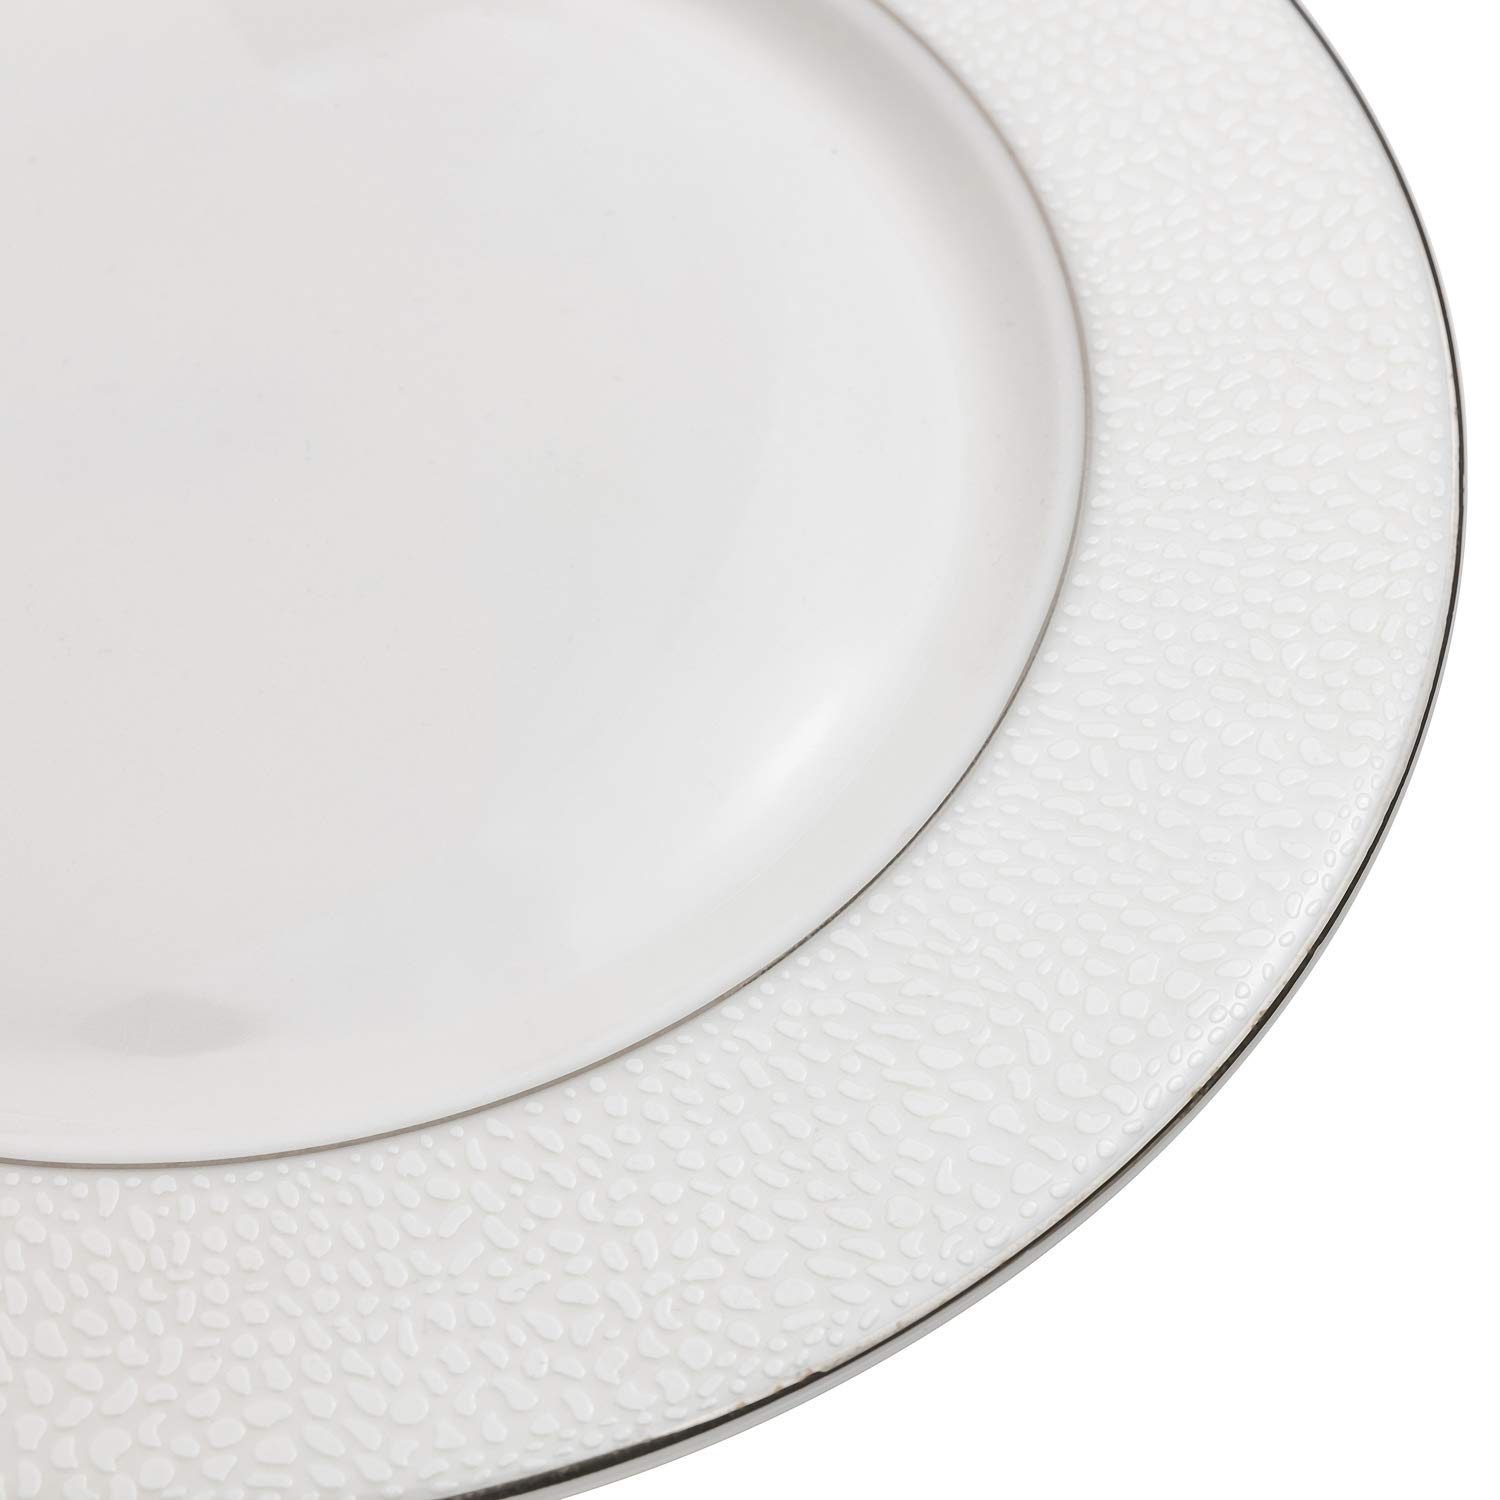 20-pc. Dinner Set Service for 4, 24K Gold-plated Luxury Bone China Tableware ("Maria" 6832P) - image 3 of 3